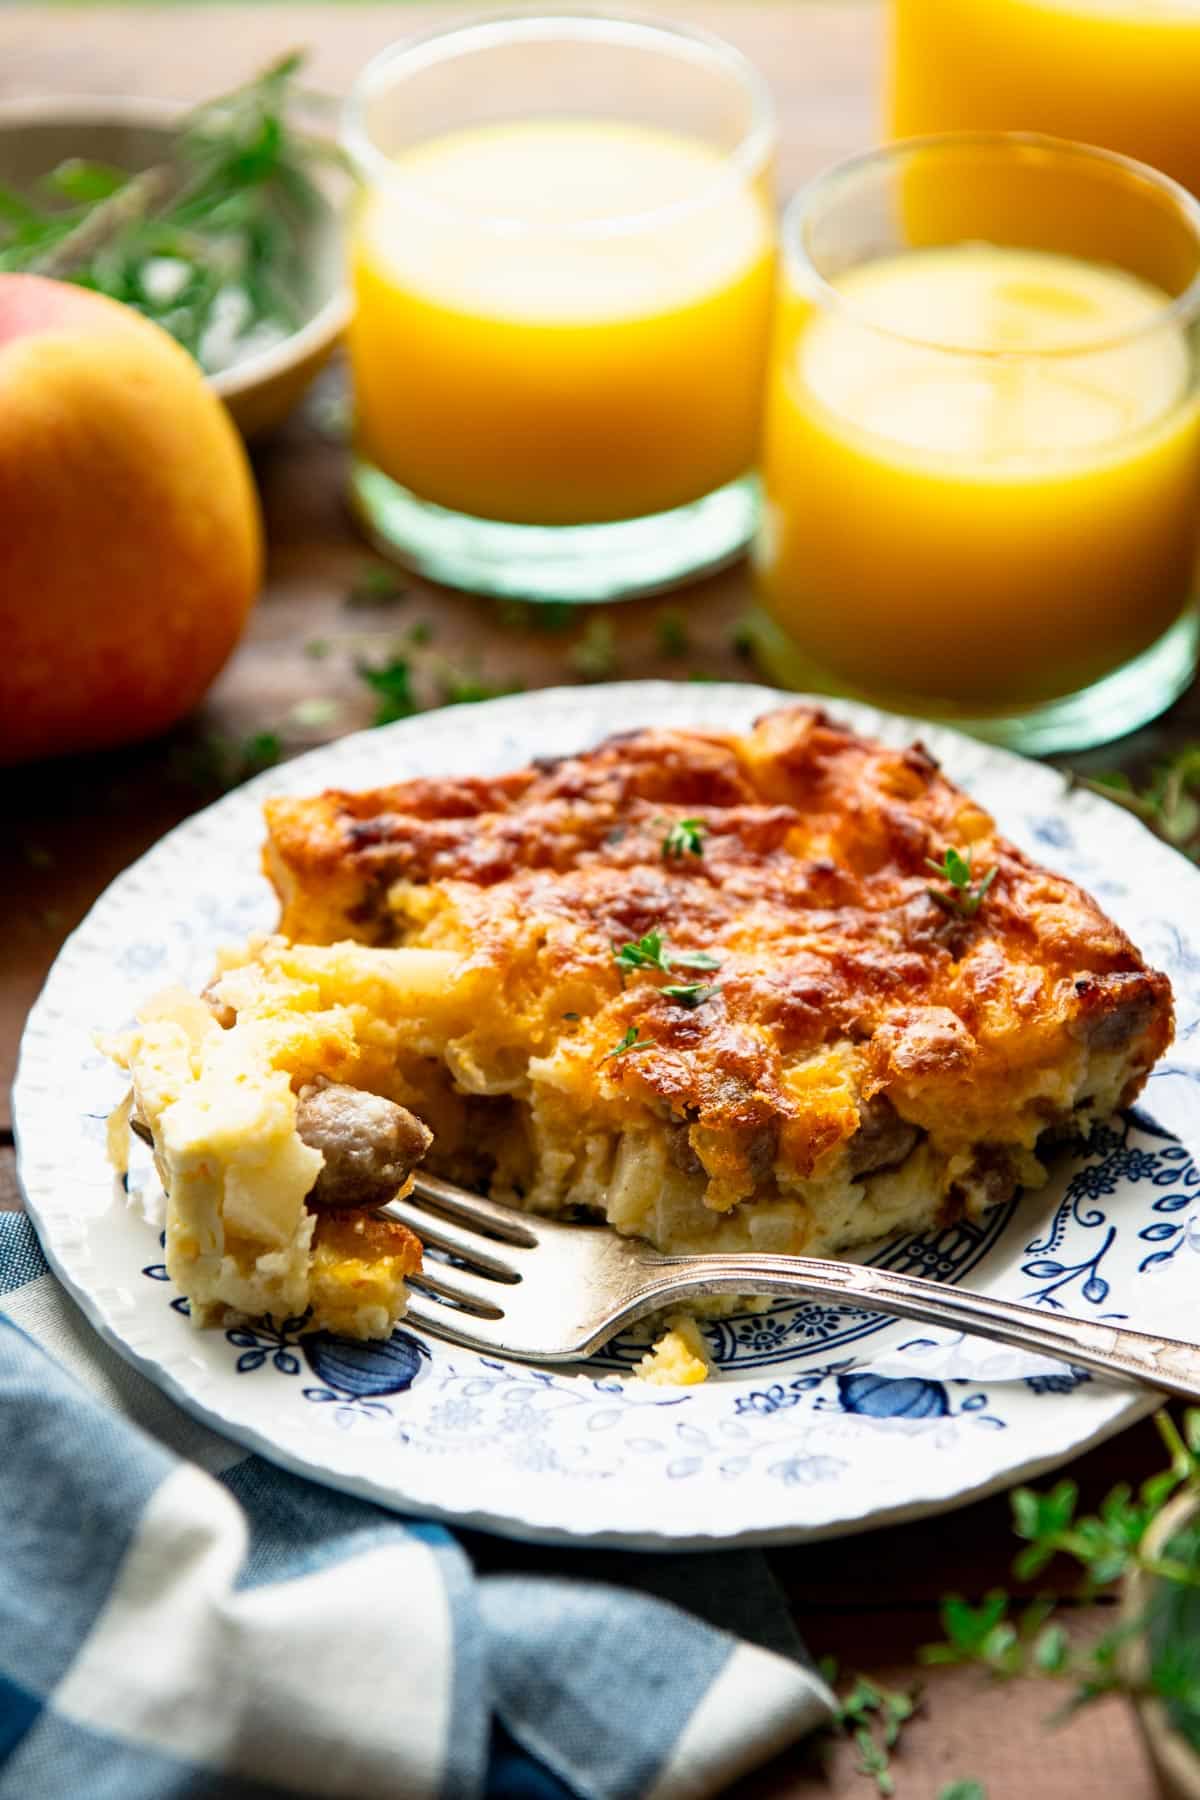 Side shot of a slice of apple and egg casserole on a plate with orange juice in the background.